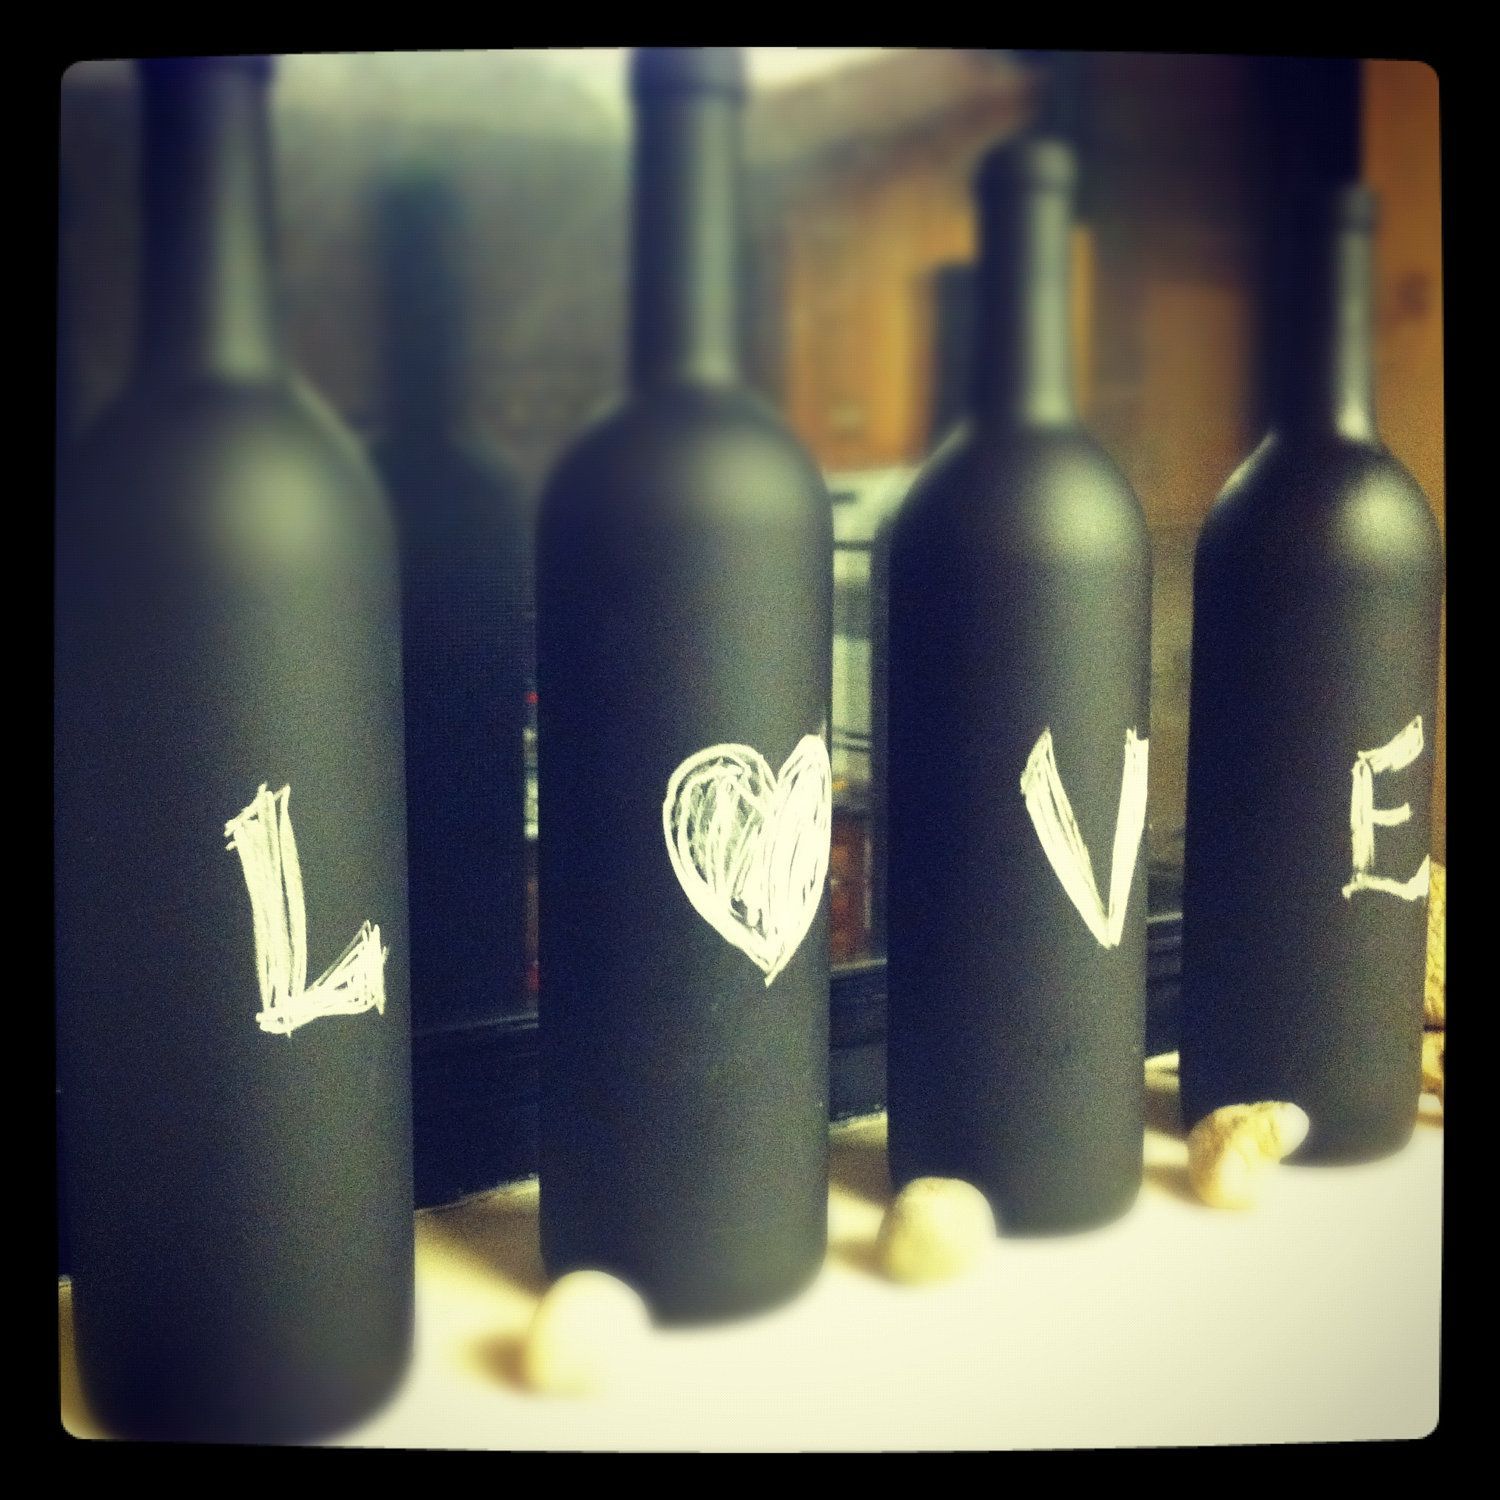 Making these today!!! Old bottles, chalkboard paint!